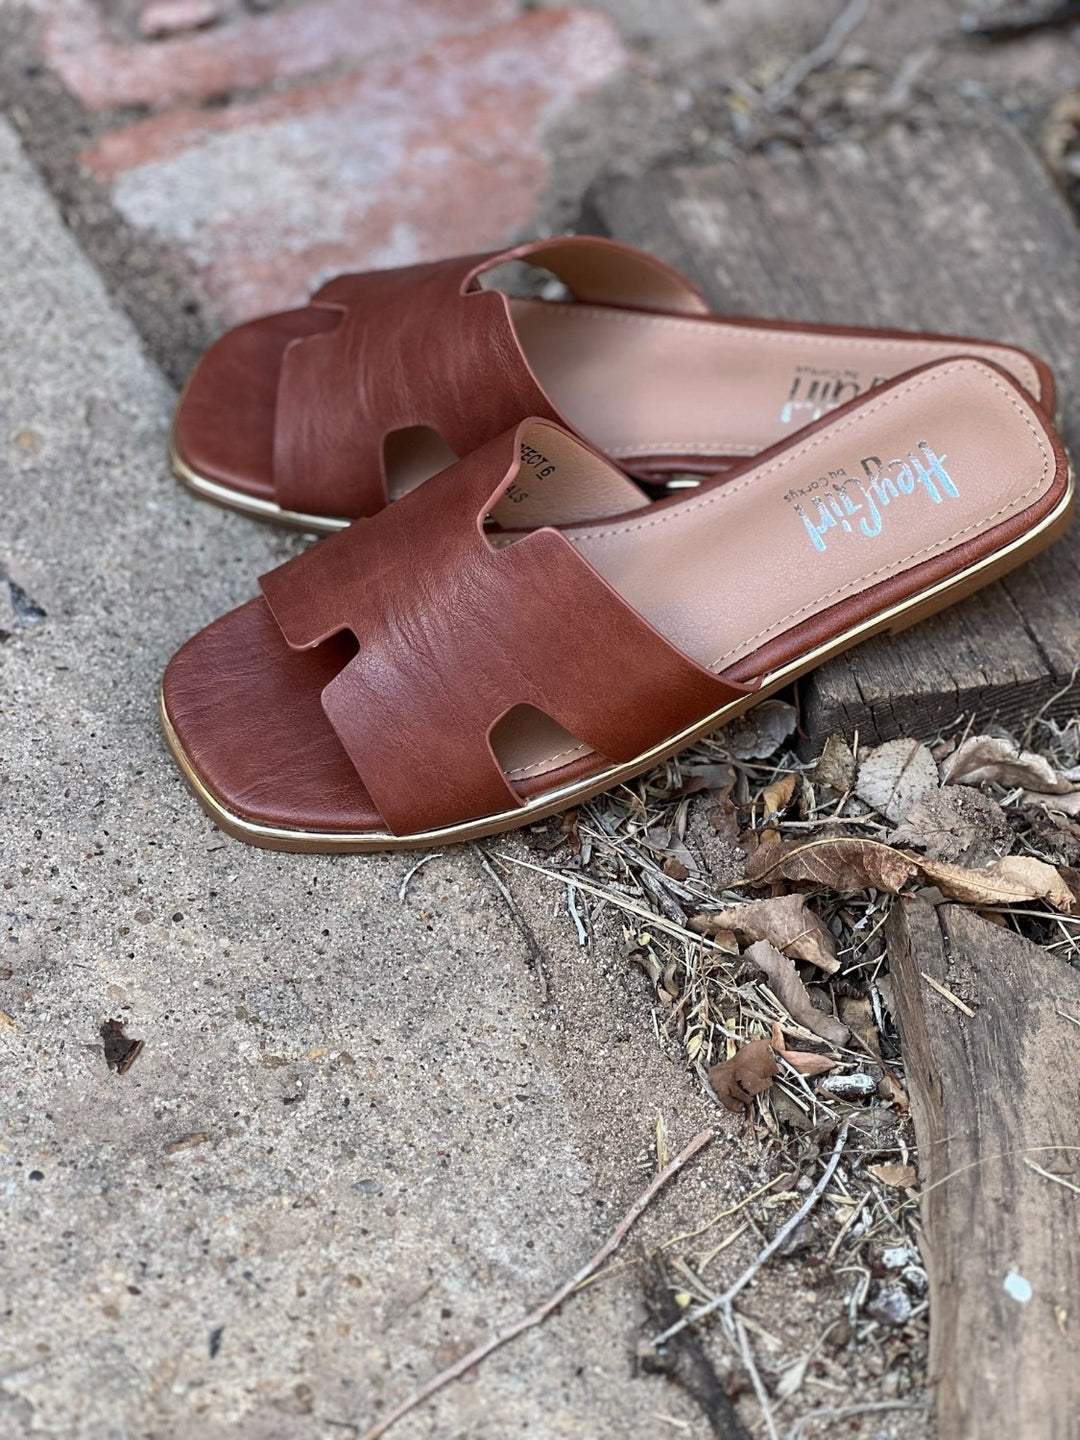 Picture Perfect Sandal by Corky's